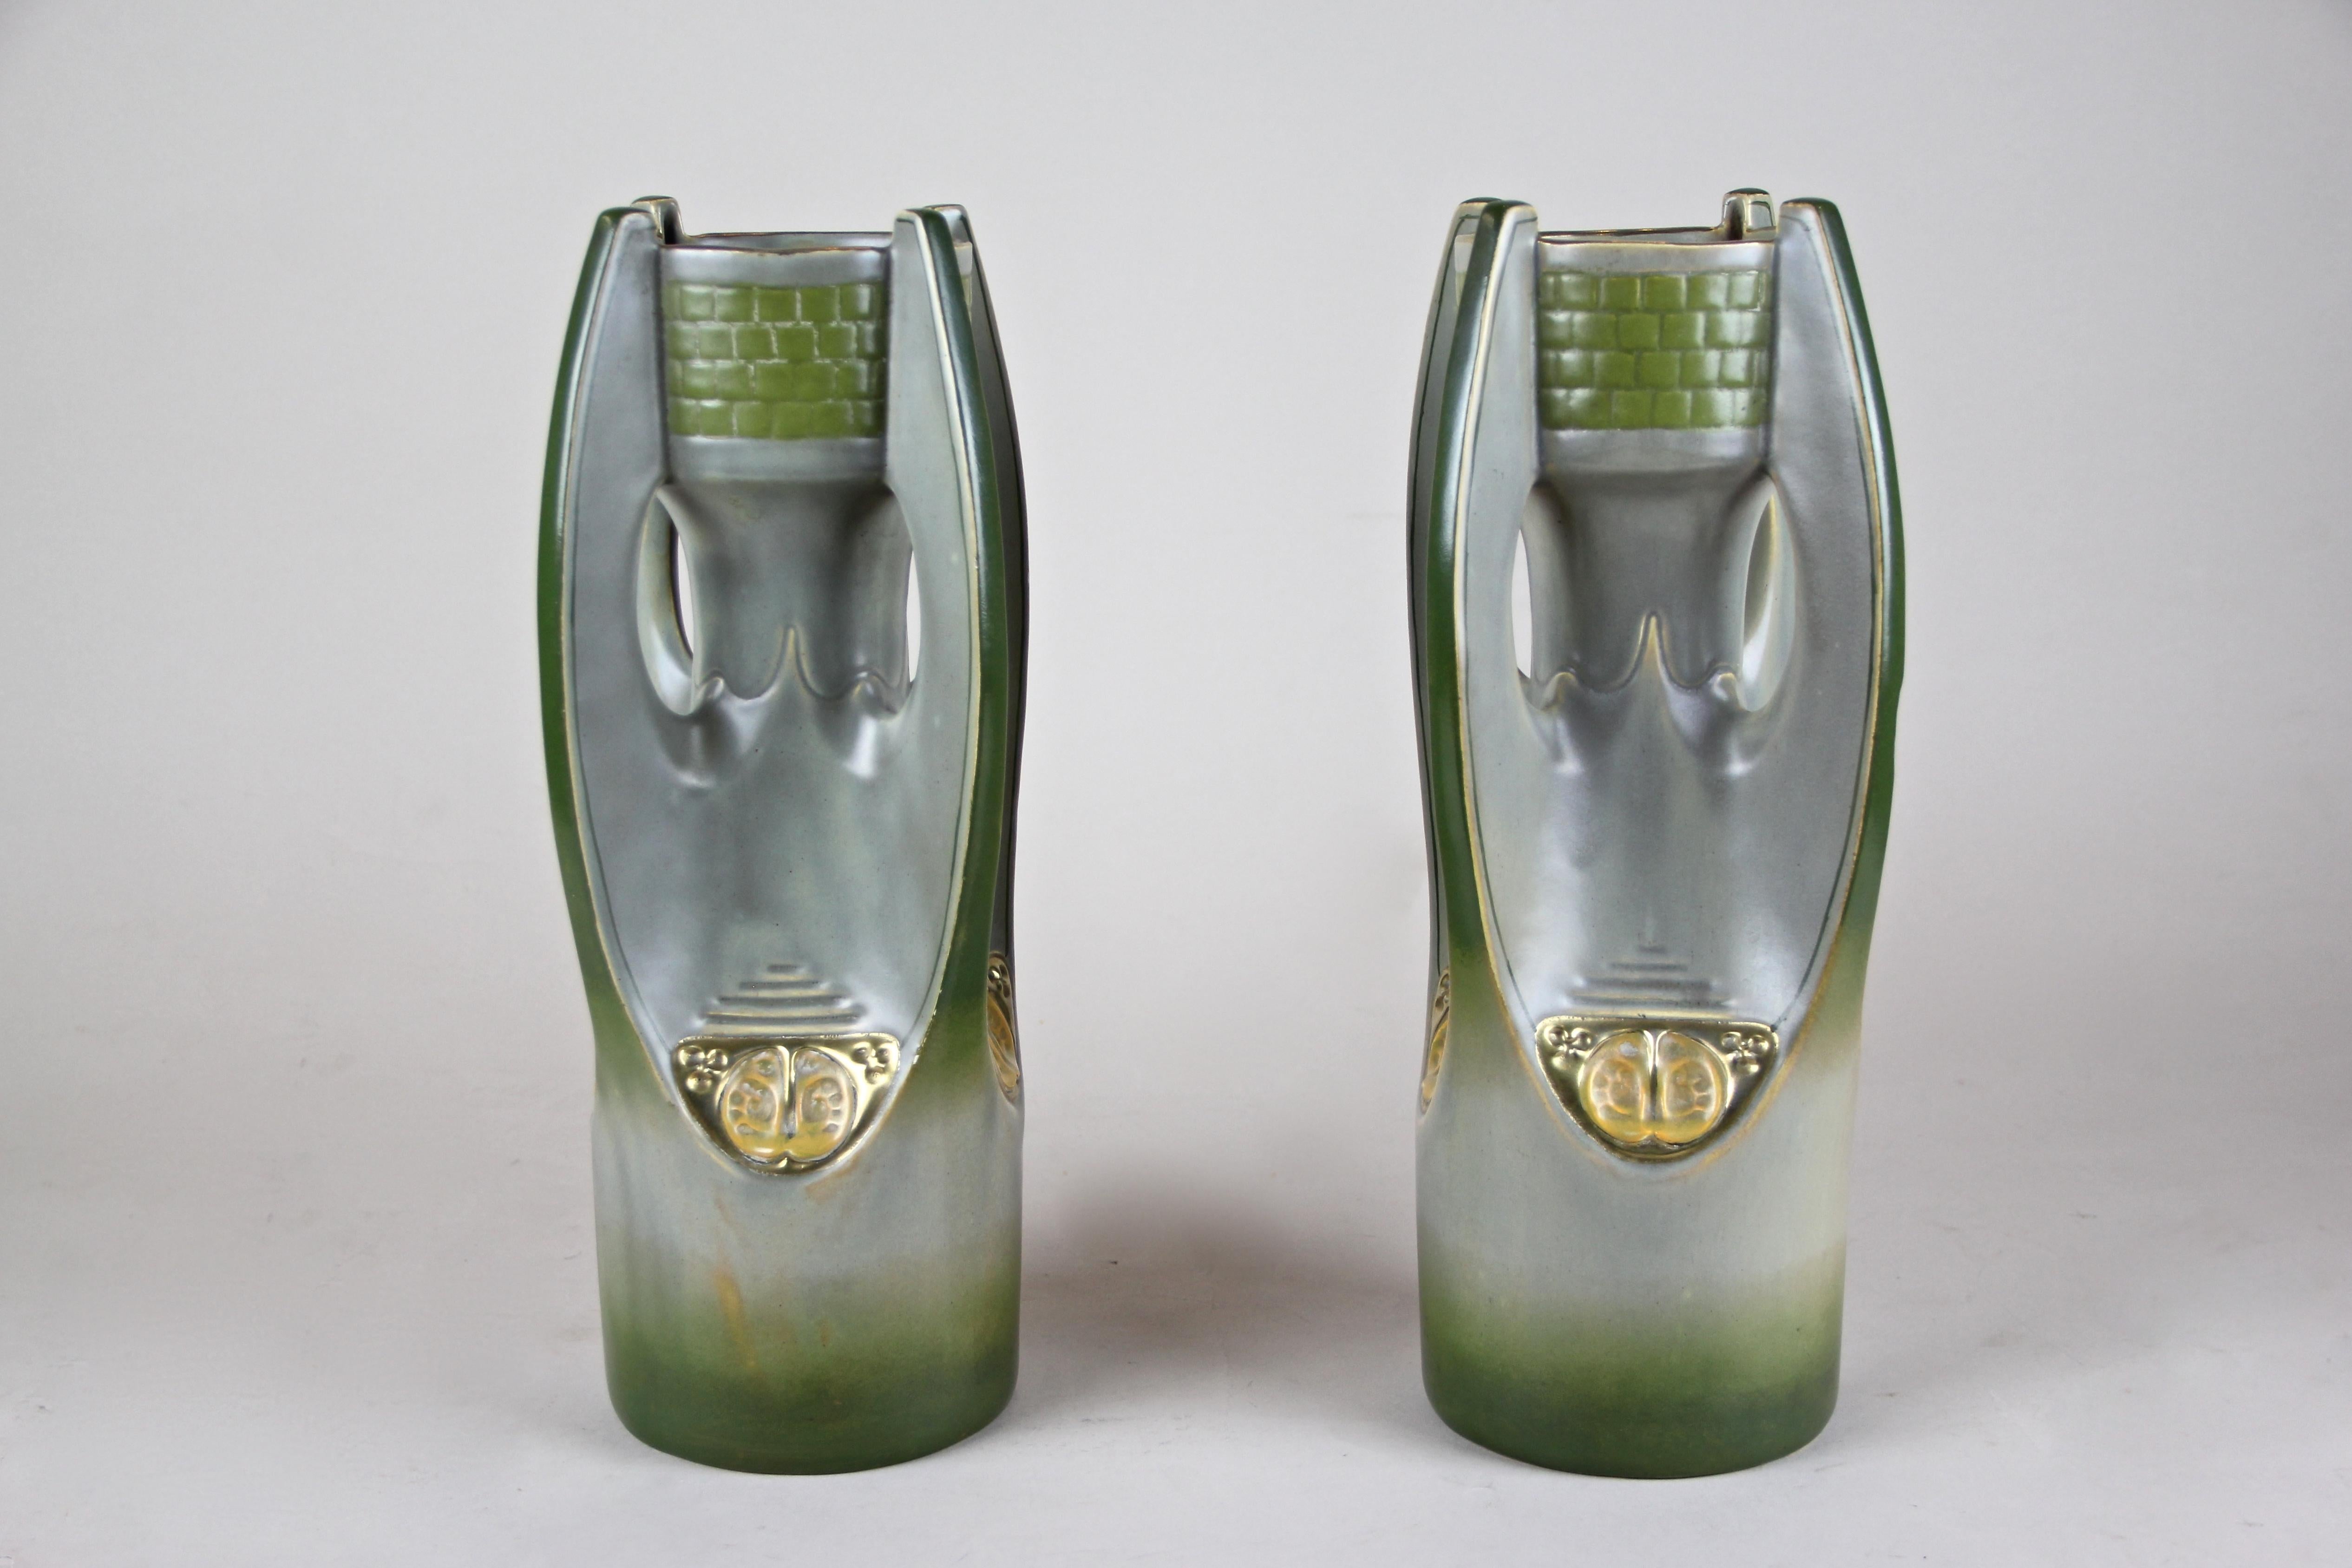 This exceptional pair of Majolica vases are absolute rare pieces of the early Art Nouveau period. Manufactured in Biela/Bohemia - now the Czech Republic - by the renown company of Julius Dressler around 1900, these large vases come in very good